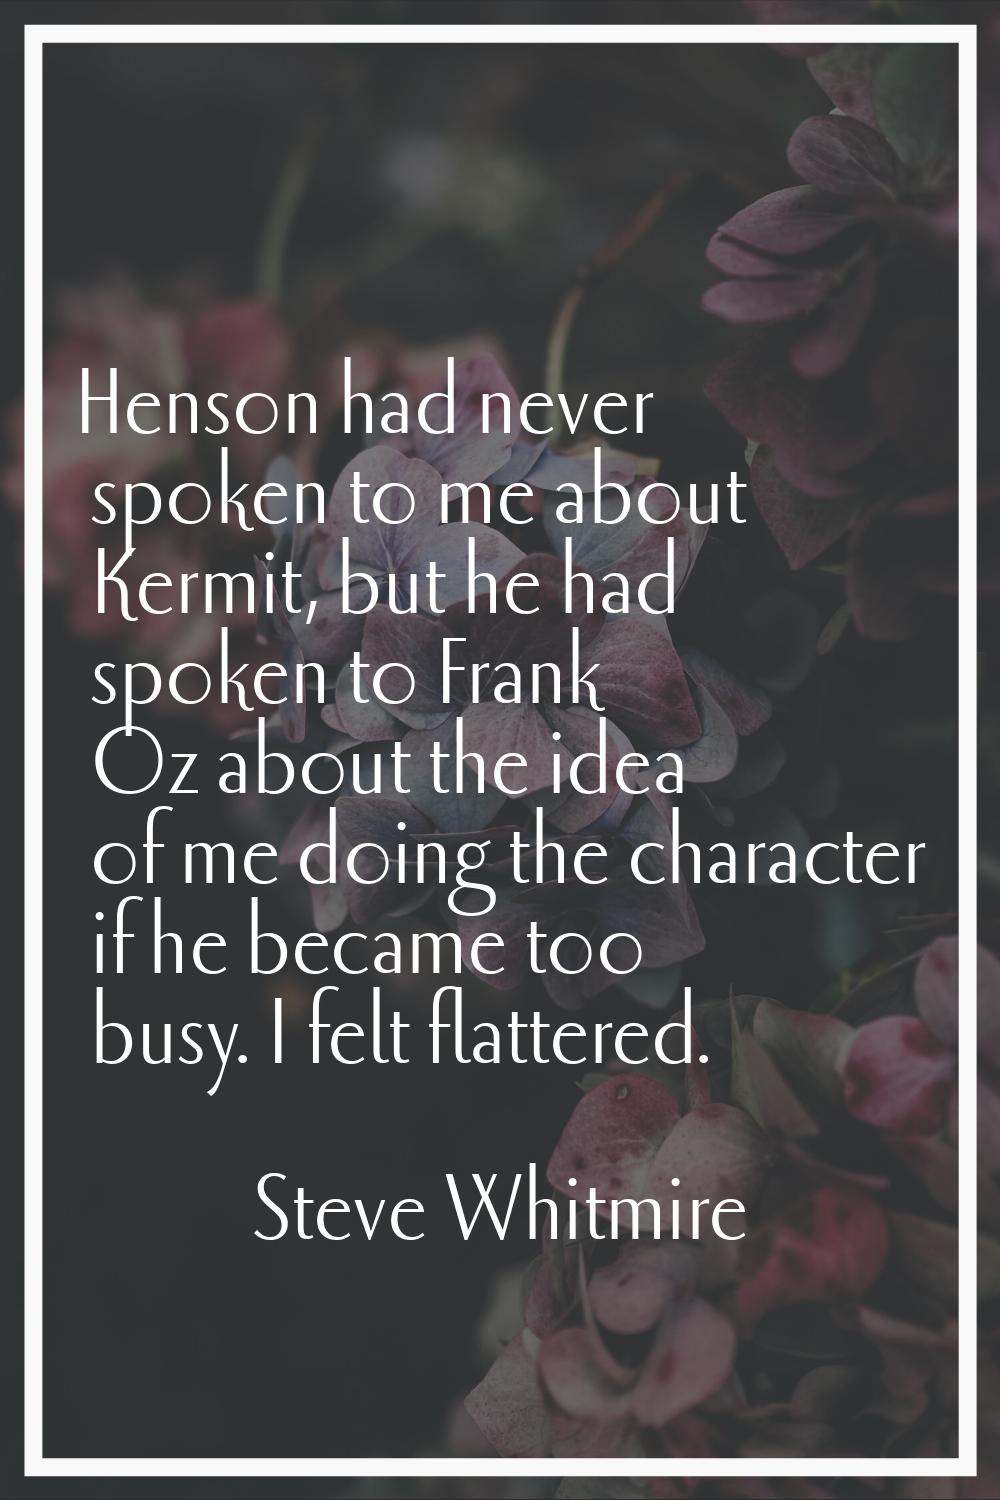 Henson had never spoken to me about Kermit, but he had spoken to Frank Oz about the idea of me doin